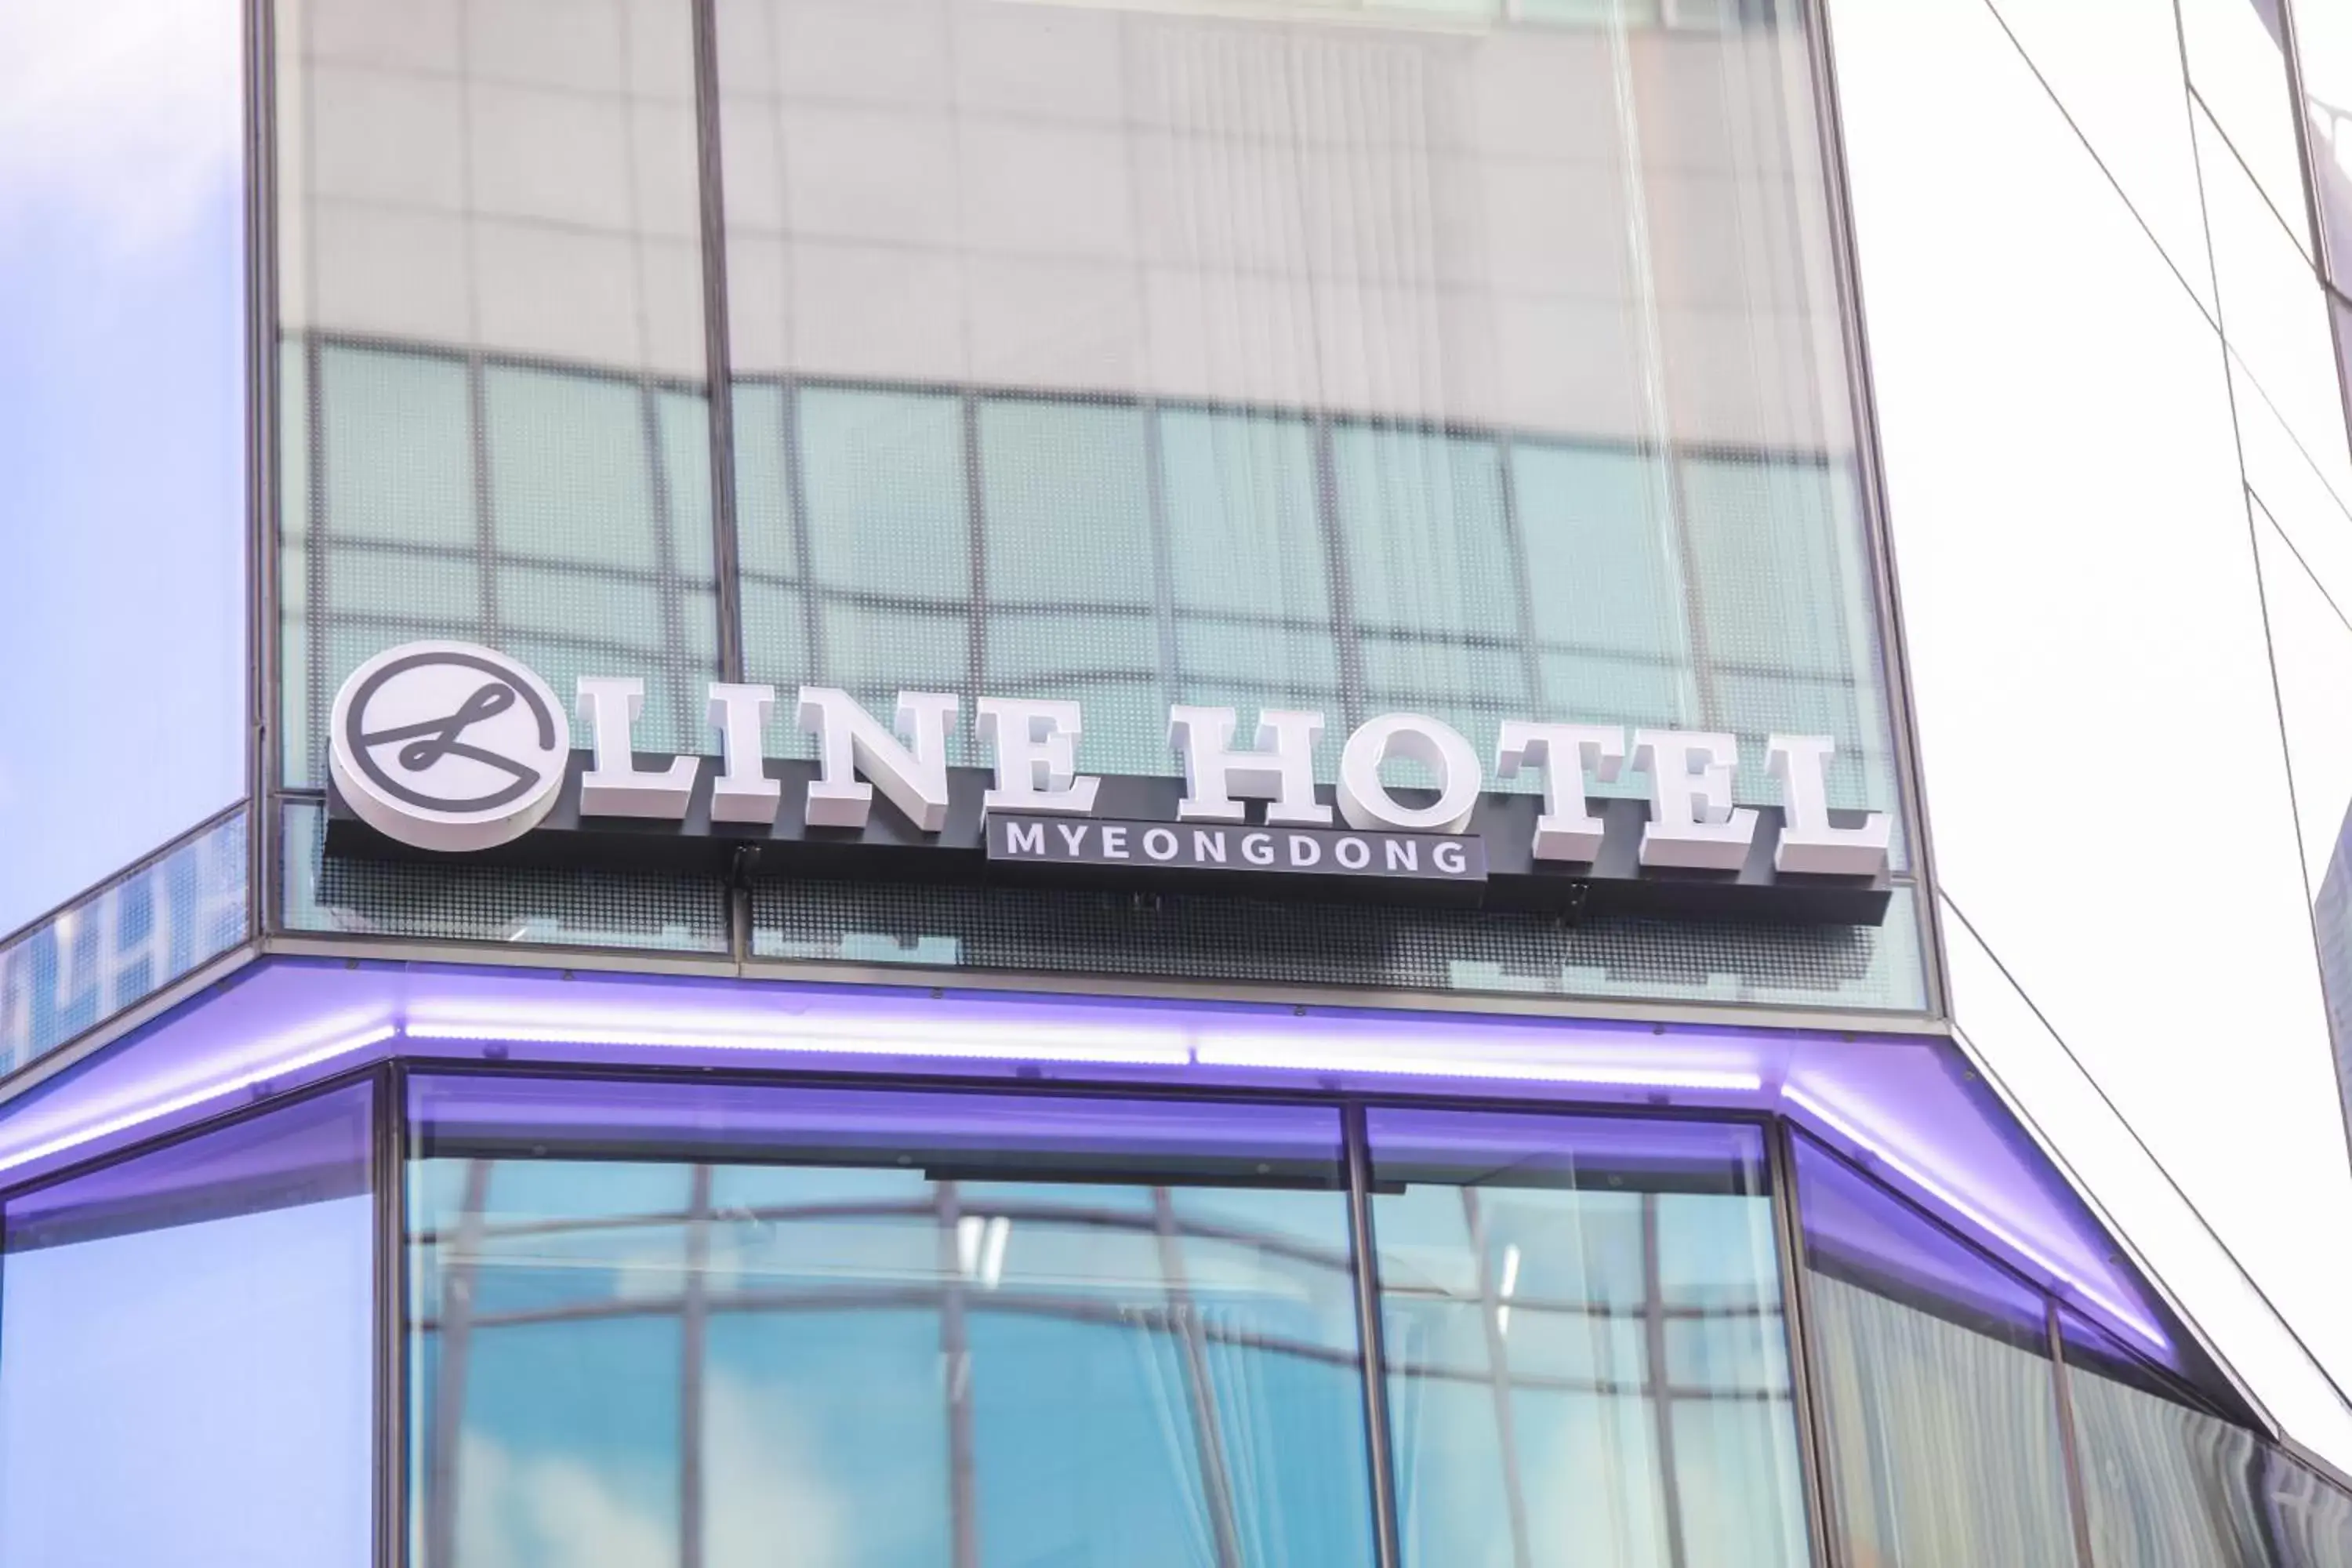 Property building in Line Hotel Myeongdong